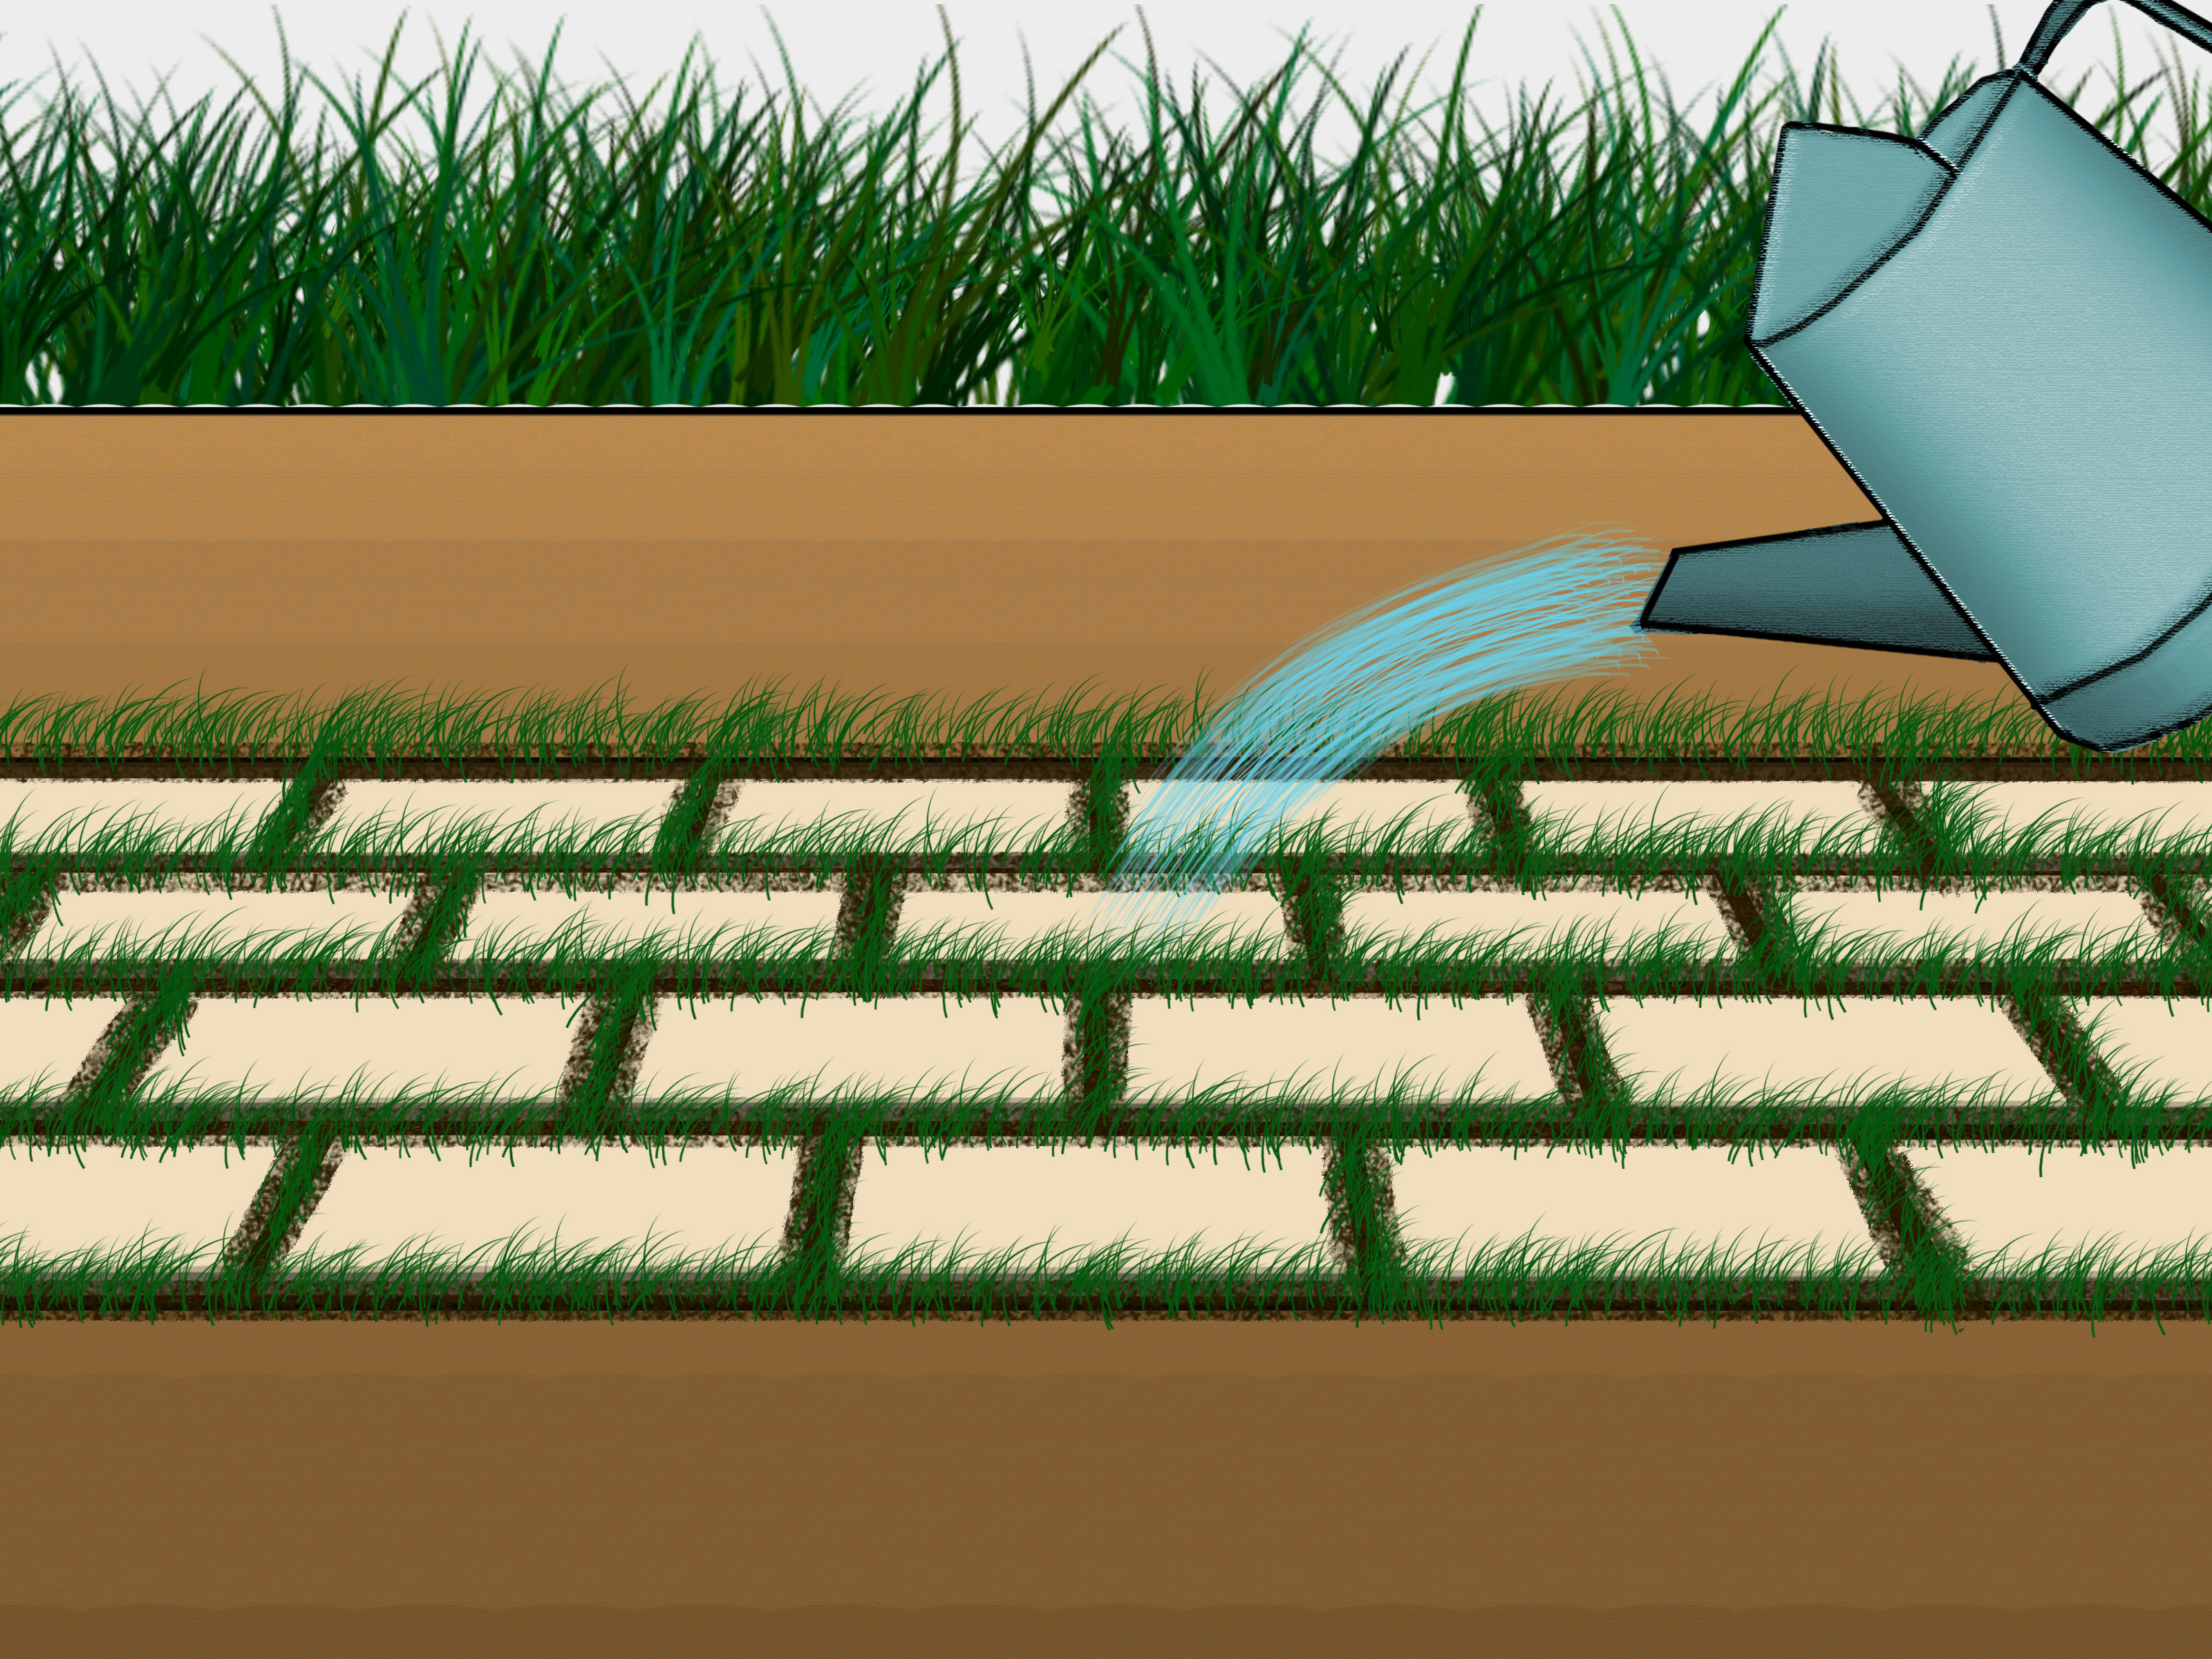 How to Grow Grass Between Pavers: 6 Steps (with Pictures)